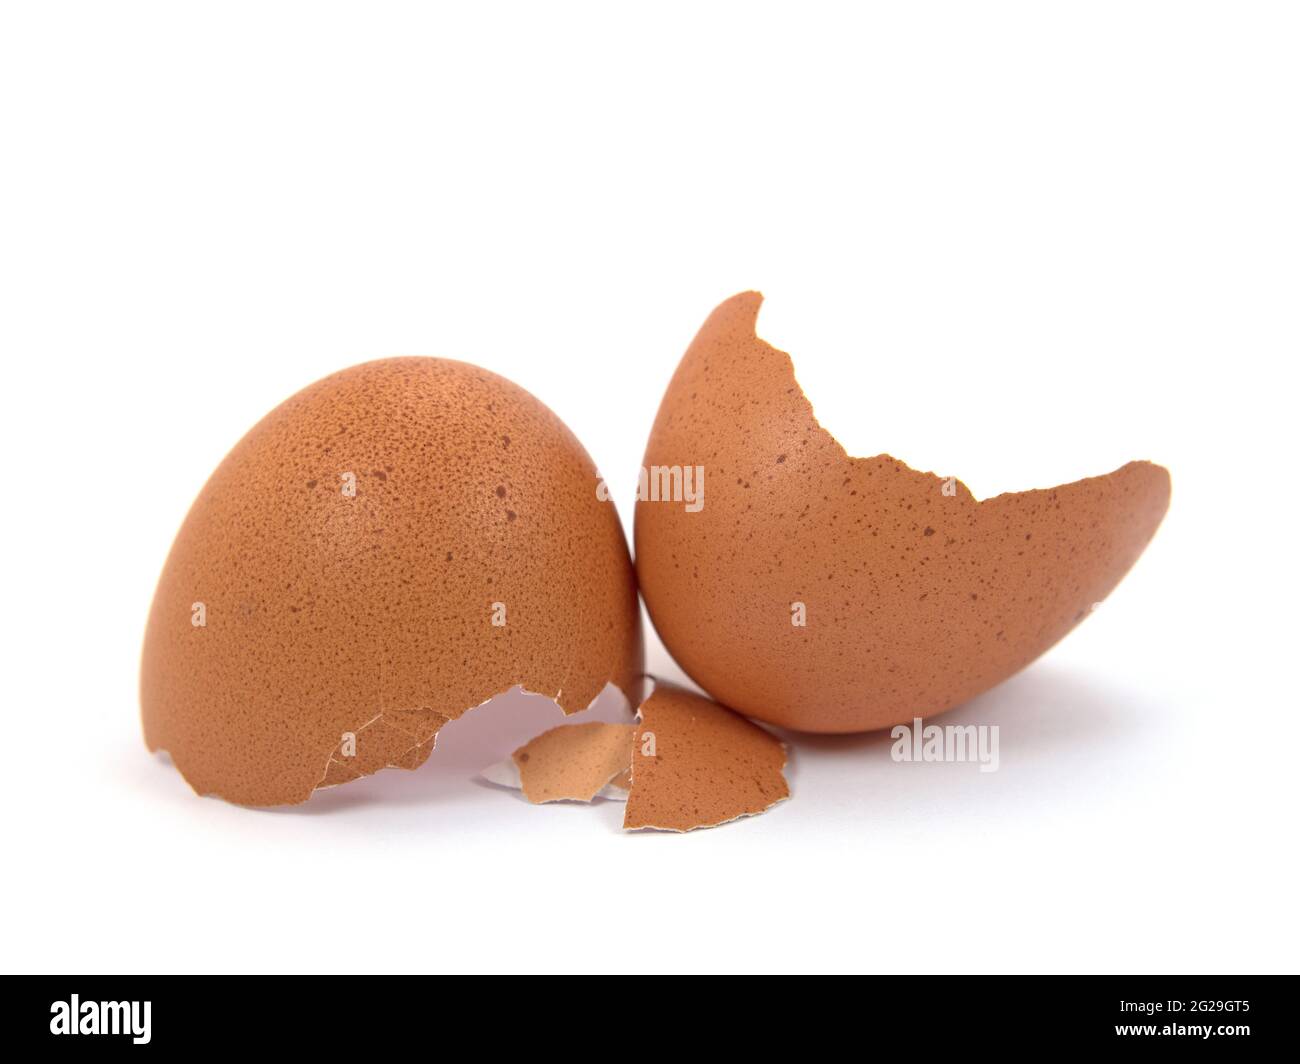 Egg shells isolated against a white background Stock Photo